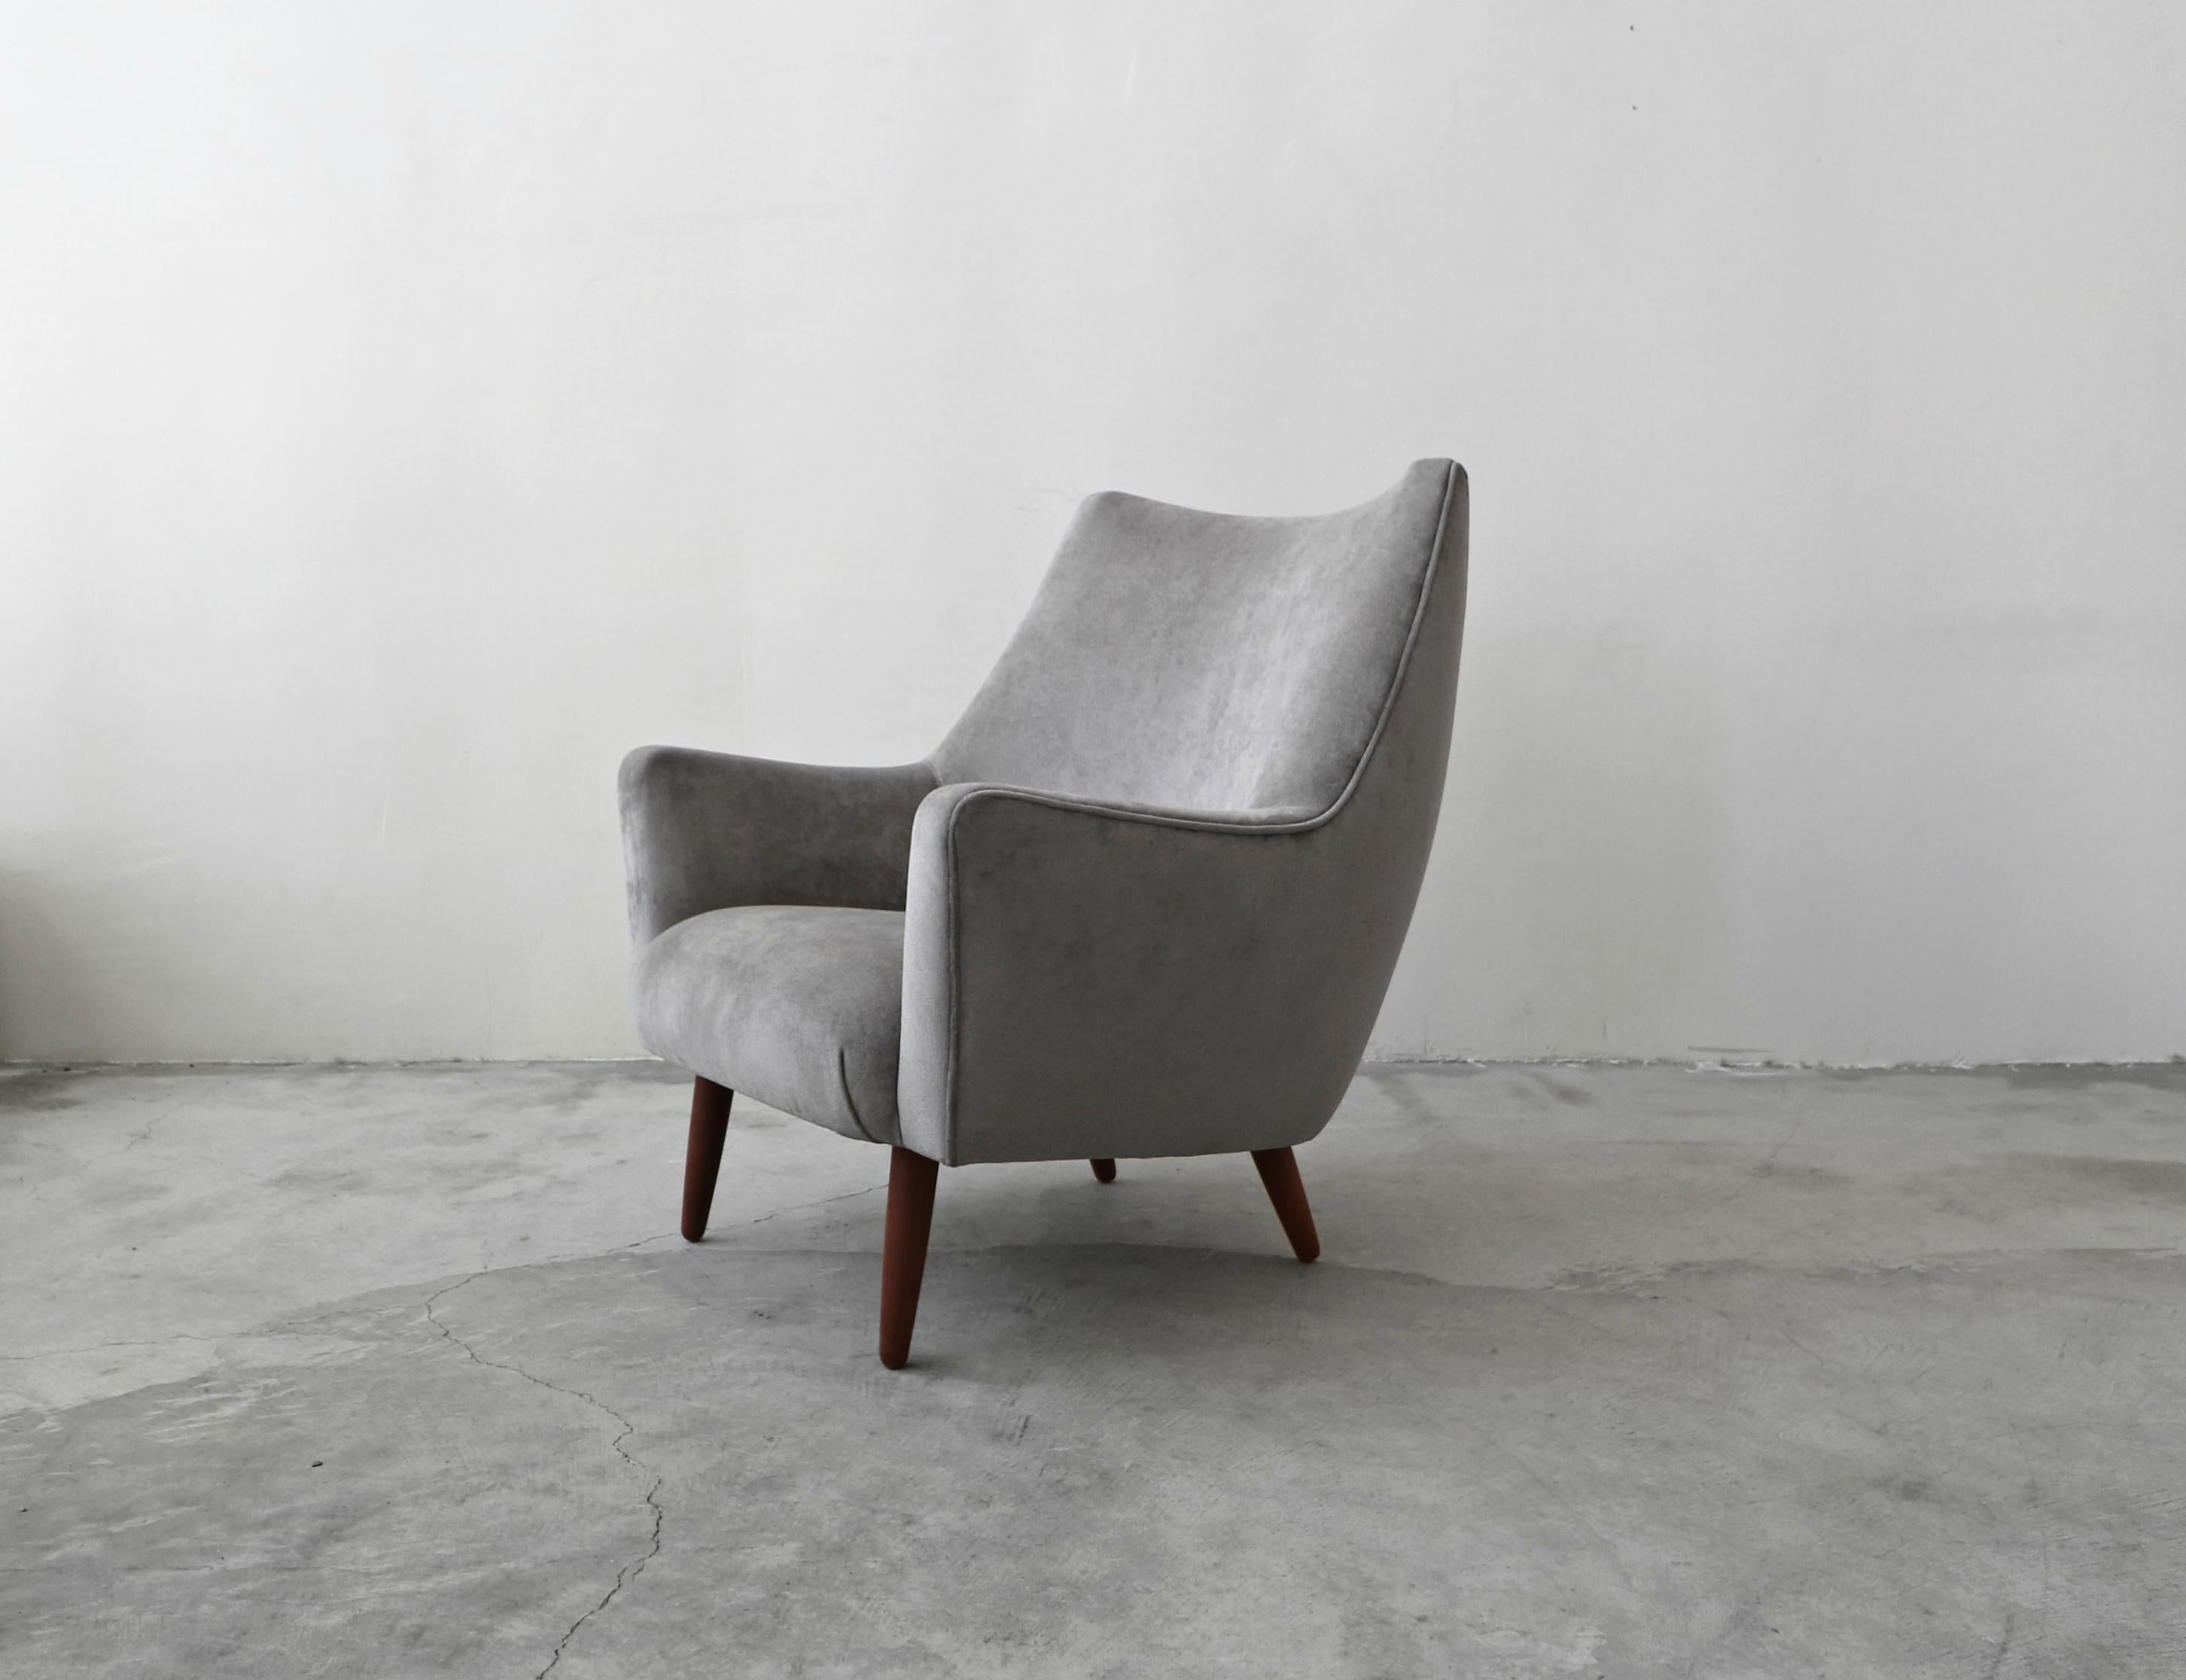 A beautiful midcentury Danish lounge chair. Large enough and stylish enough to stand alone, this gorgeous chair is the perfect one off chair for any room. Designed with Classic Danish craftsmanship, there's not a line that disappoints. Check out her